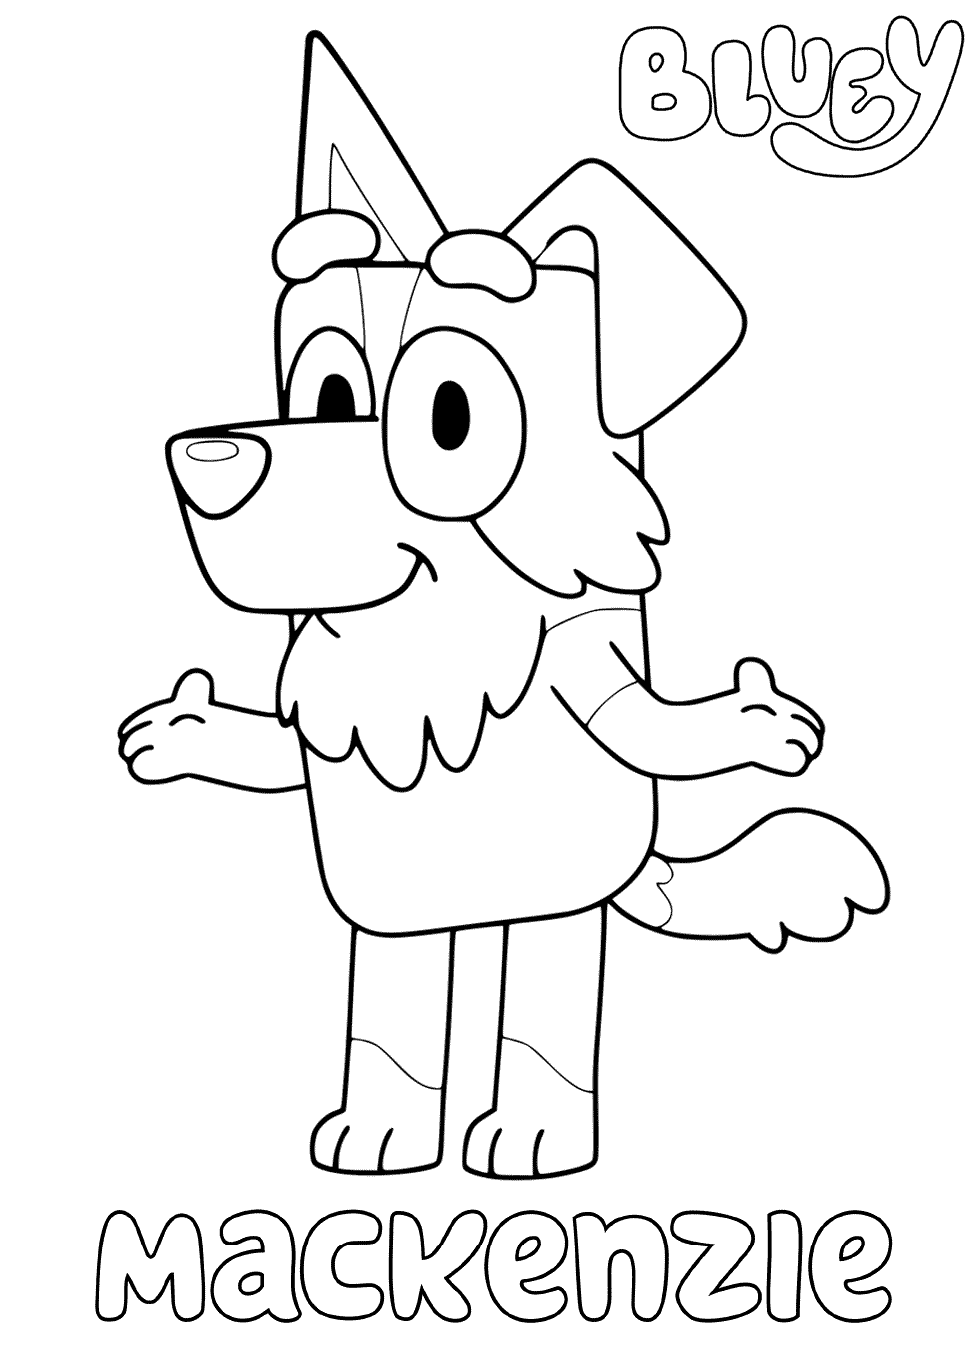 Mackenzie Bluey Coloring Pages